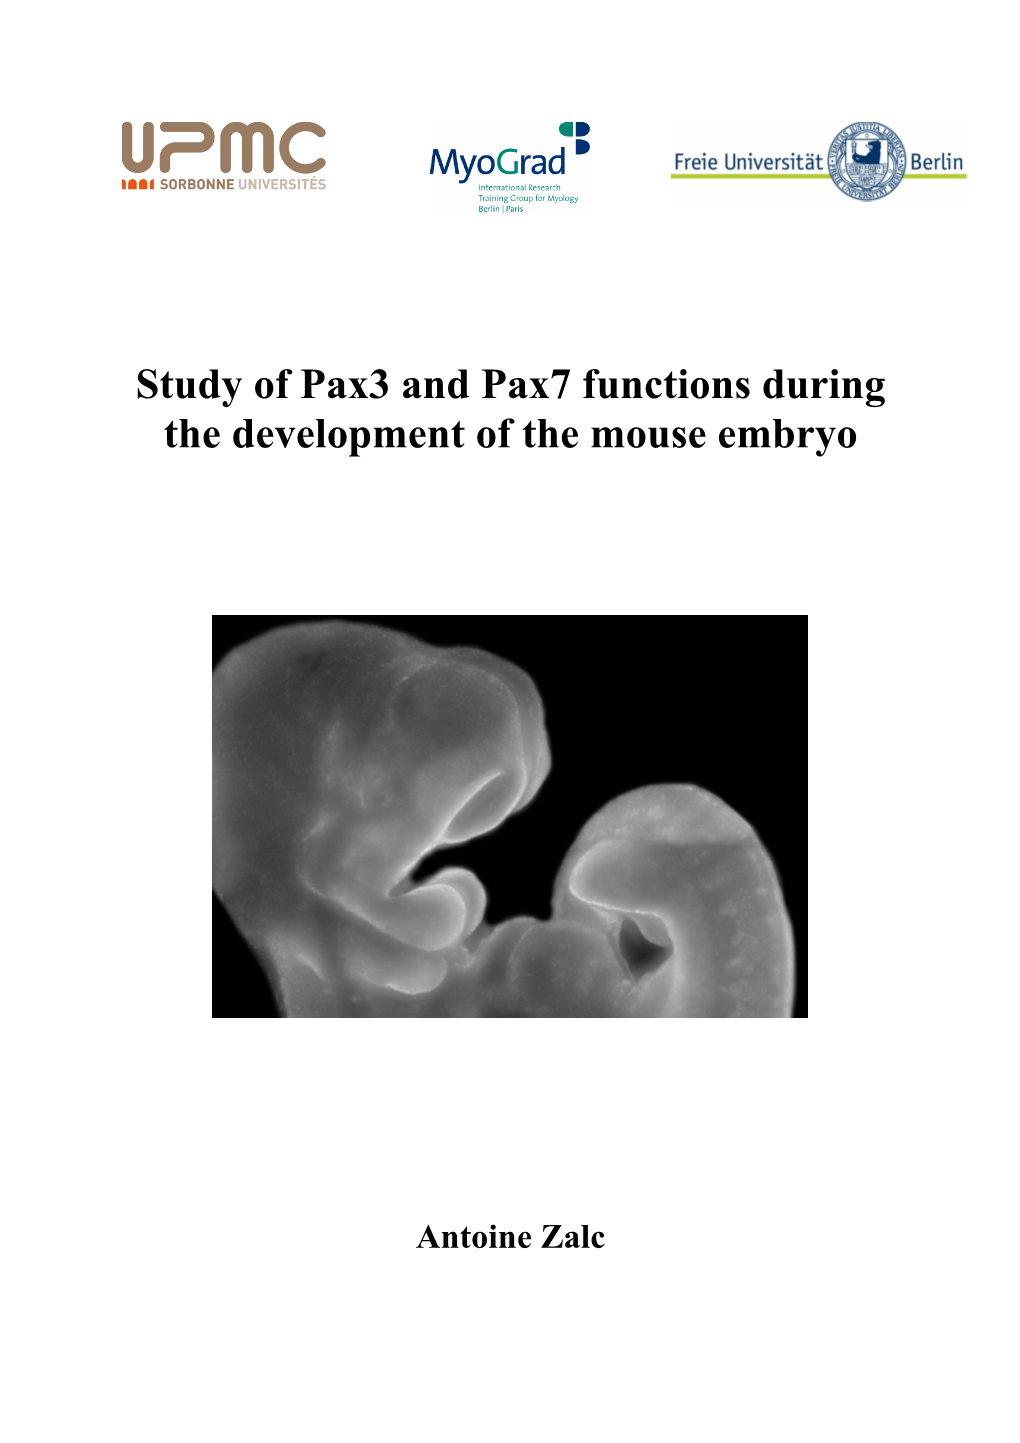 Study of Pax3 and Pax7 Functions During the Development of the Mouse Embryo